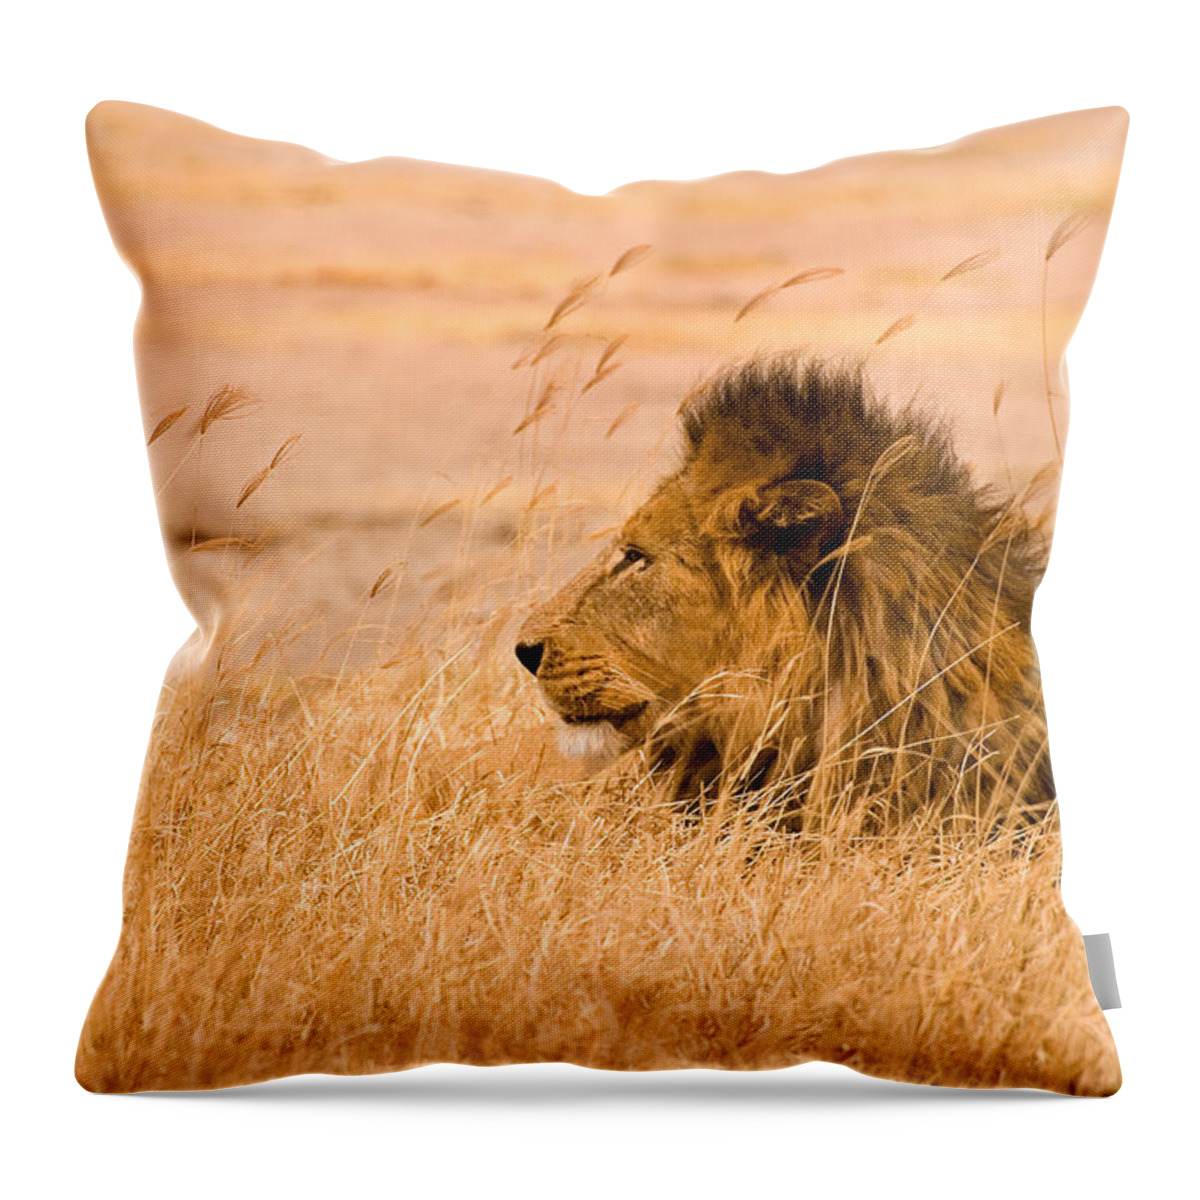 #faatoppicks Throw Pillow featuring the photograph King of The Pride by Adam Romanowicz